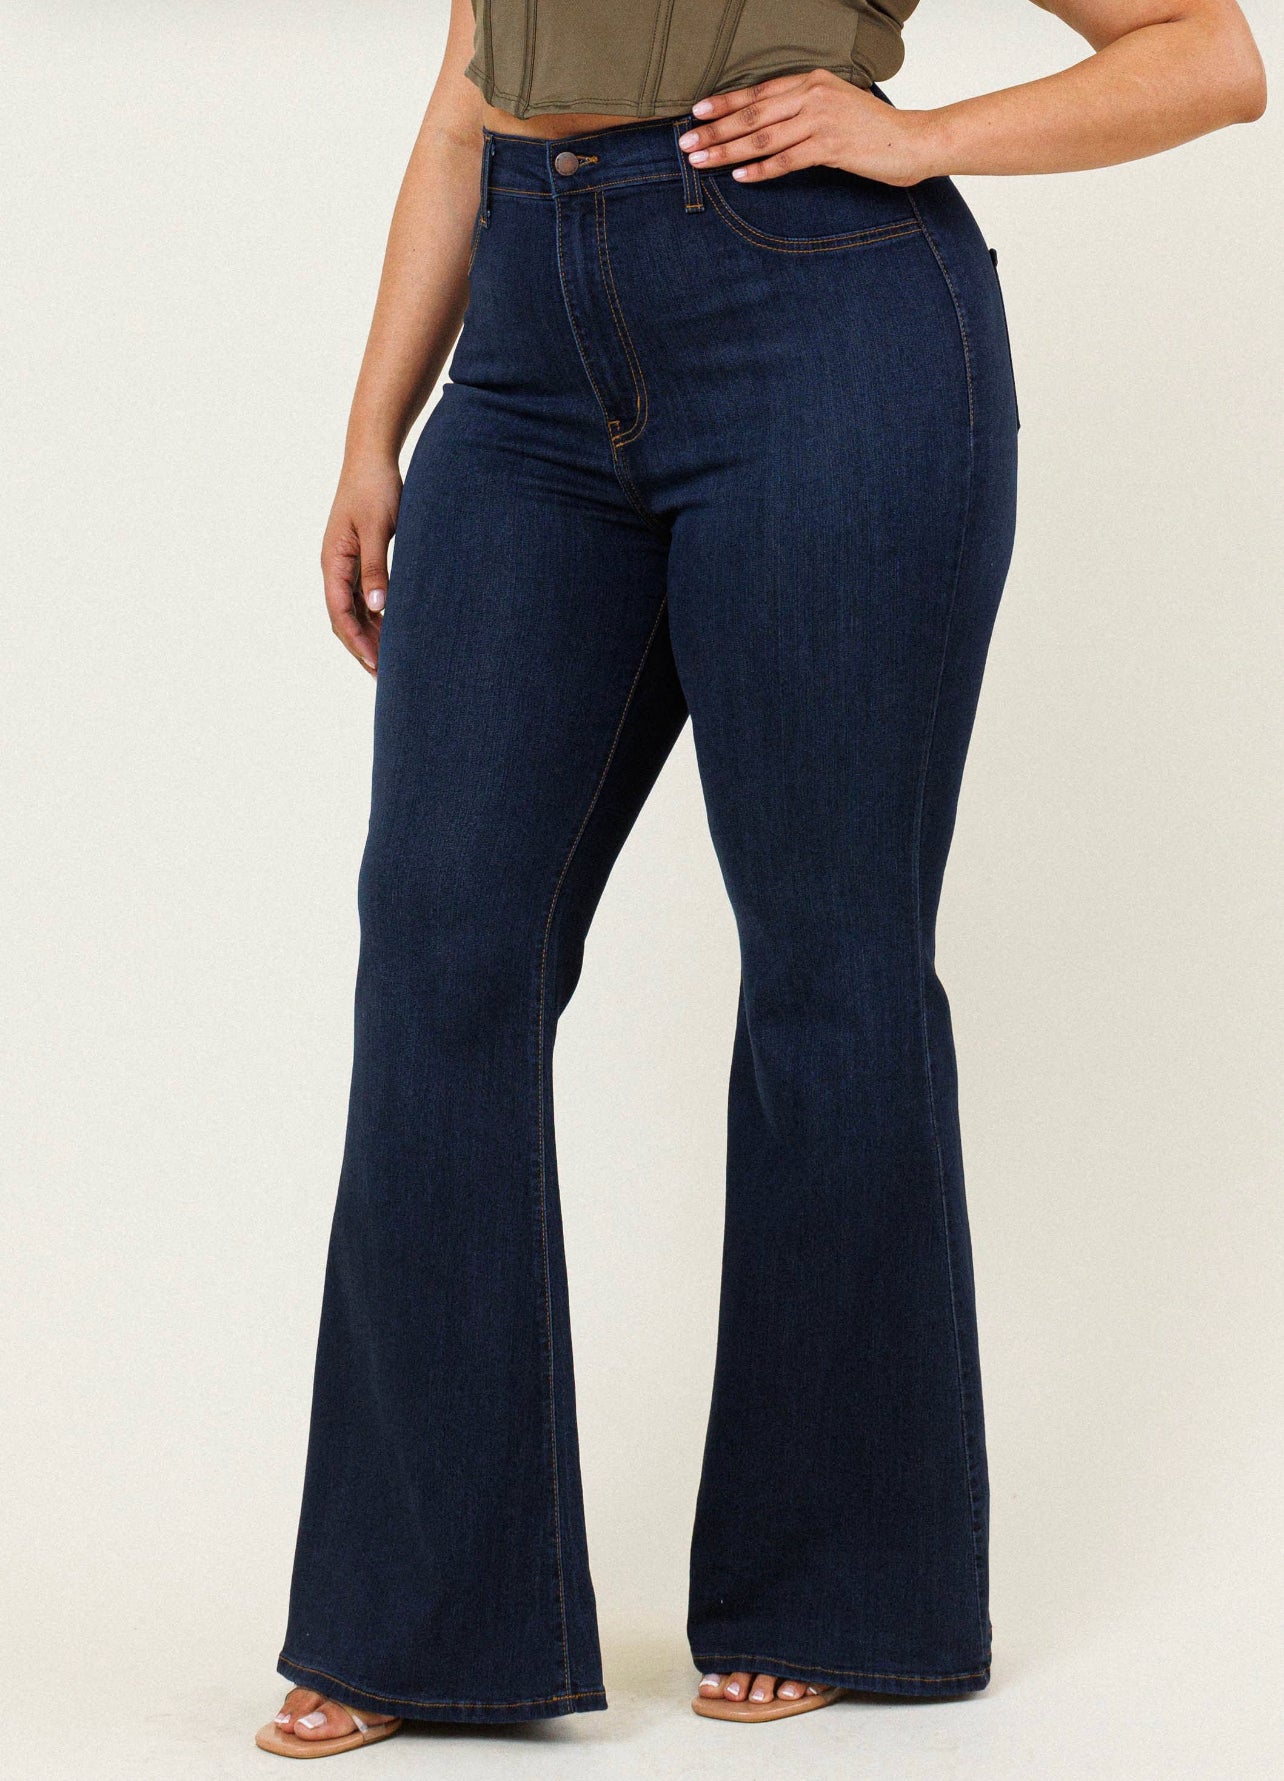 High Star Plus Size Flared Women Dark Blue Jeans - Buy High Star Plus Size  Flared Women Dark Blue Jeans Online at Best Prices in India